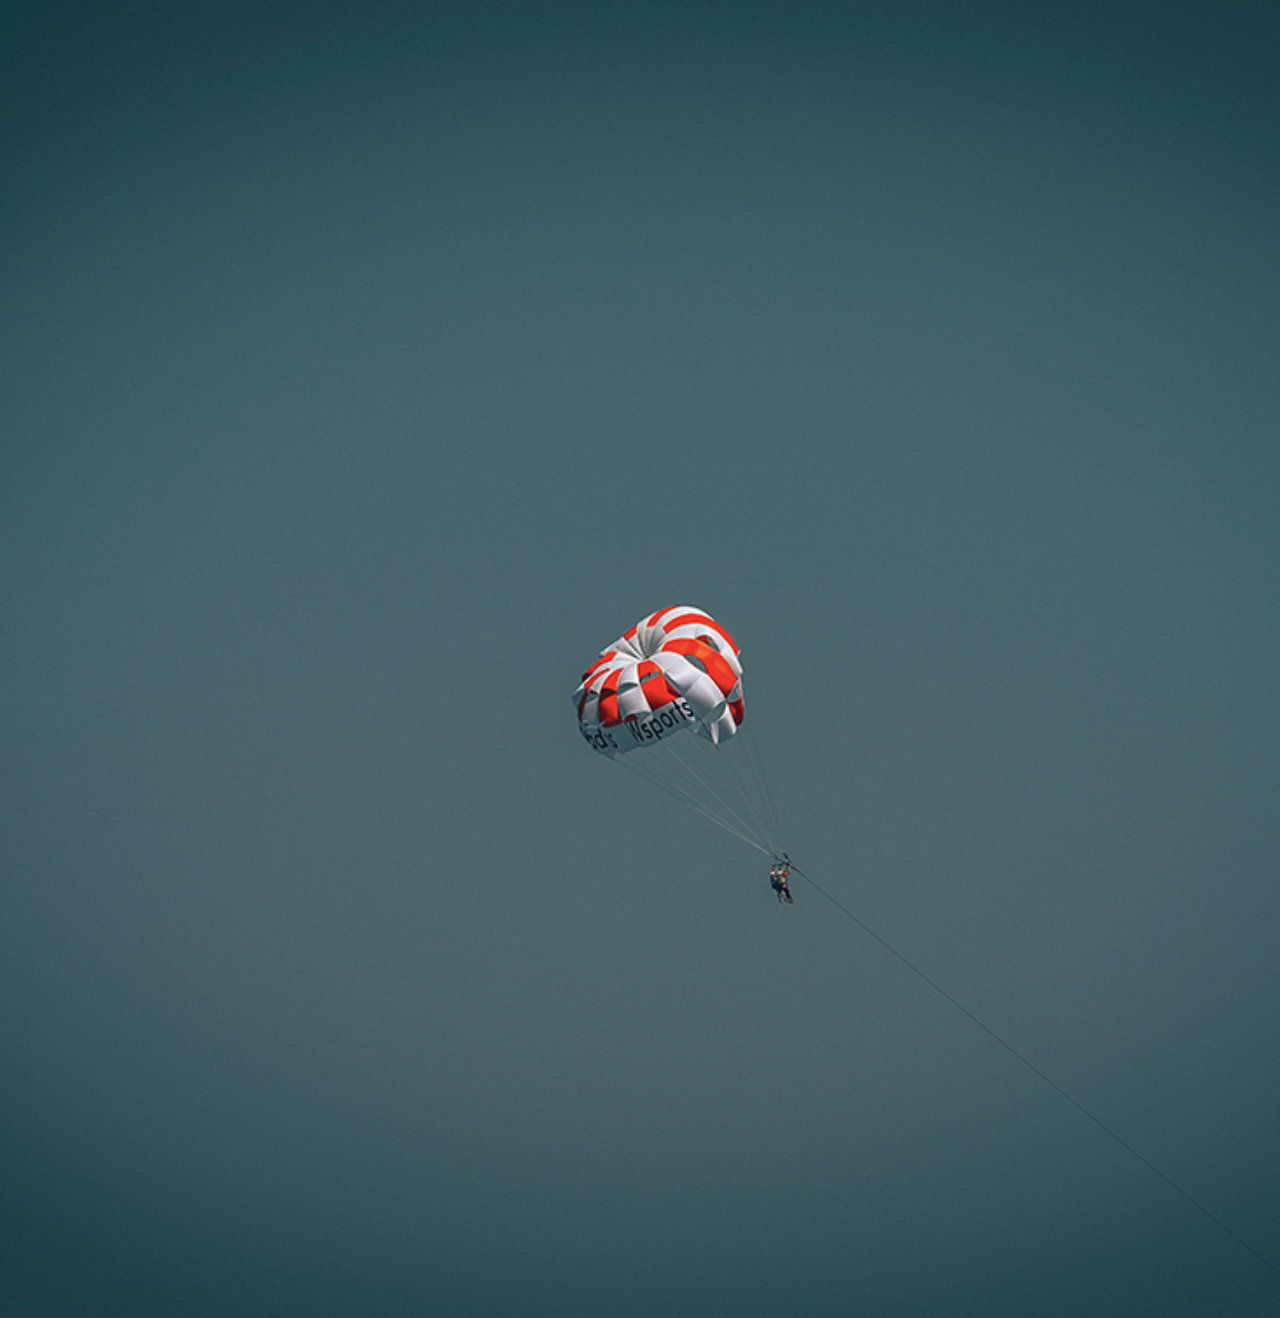 A person dangling from a balloon